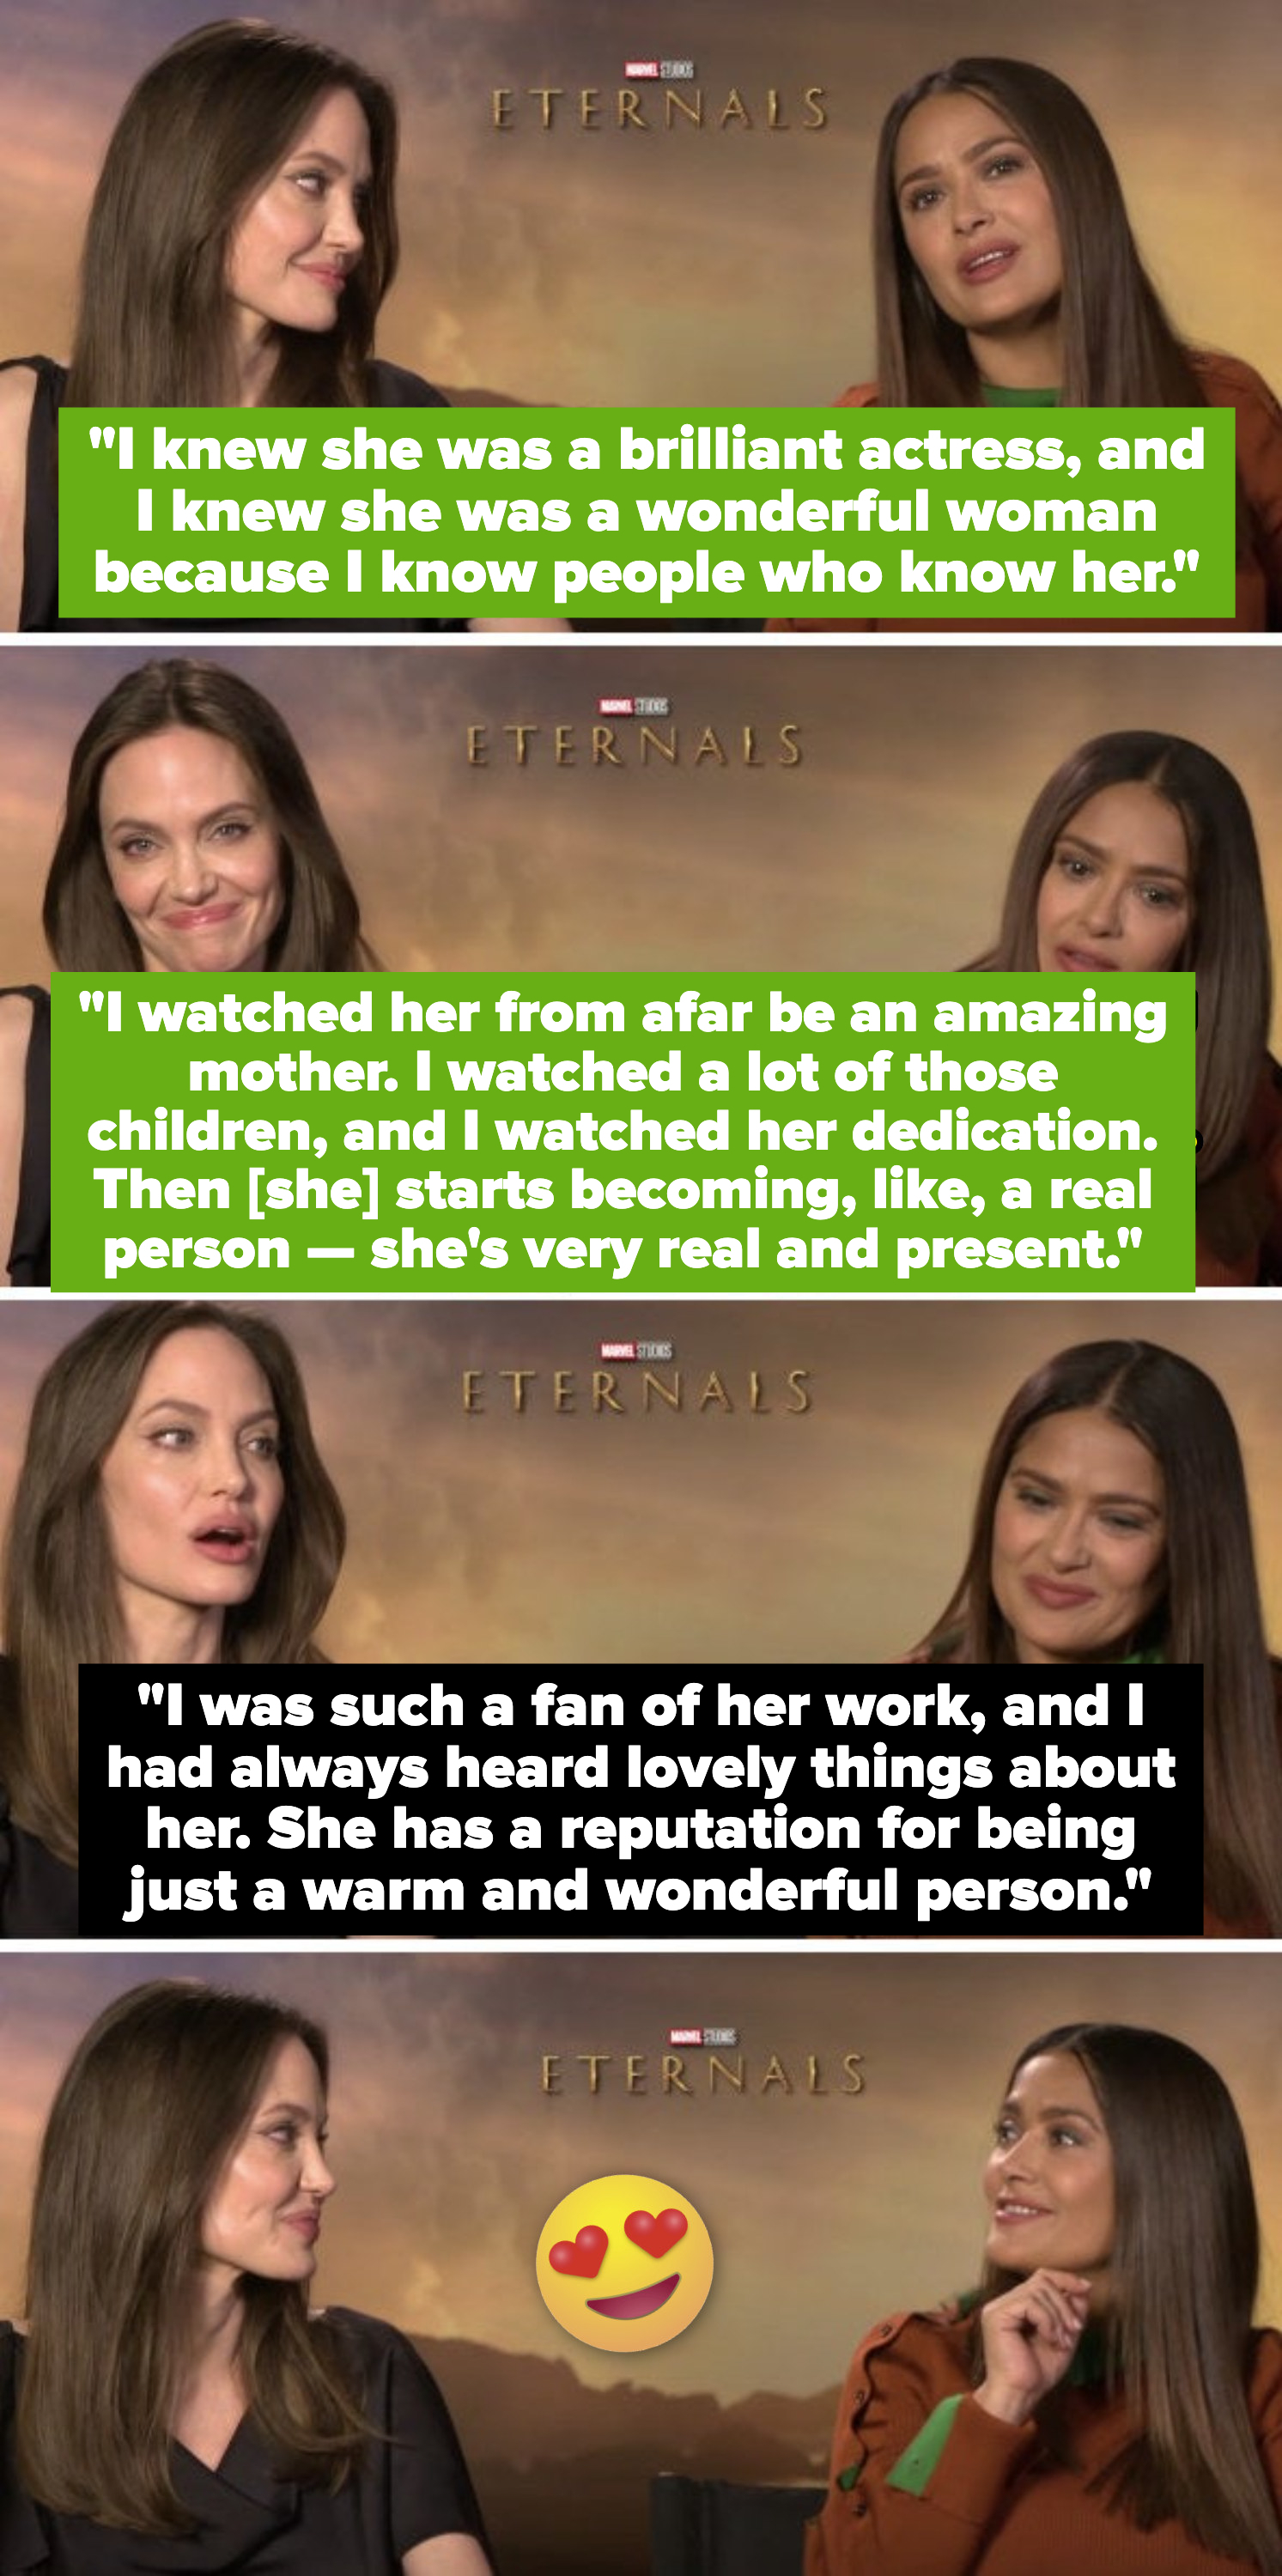 Salma about Angelina: &quot;I watched her be an amazing mother — I watched her dedication. She&#x27;s very real and present.&quot; Angelina about Salma: &quot;I was such a fan of her work. She has a reputation for being just a warm and wonderful person&quot;